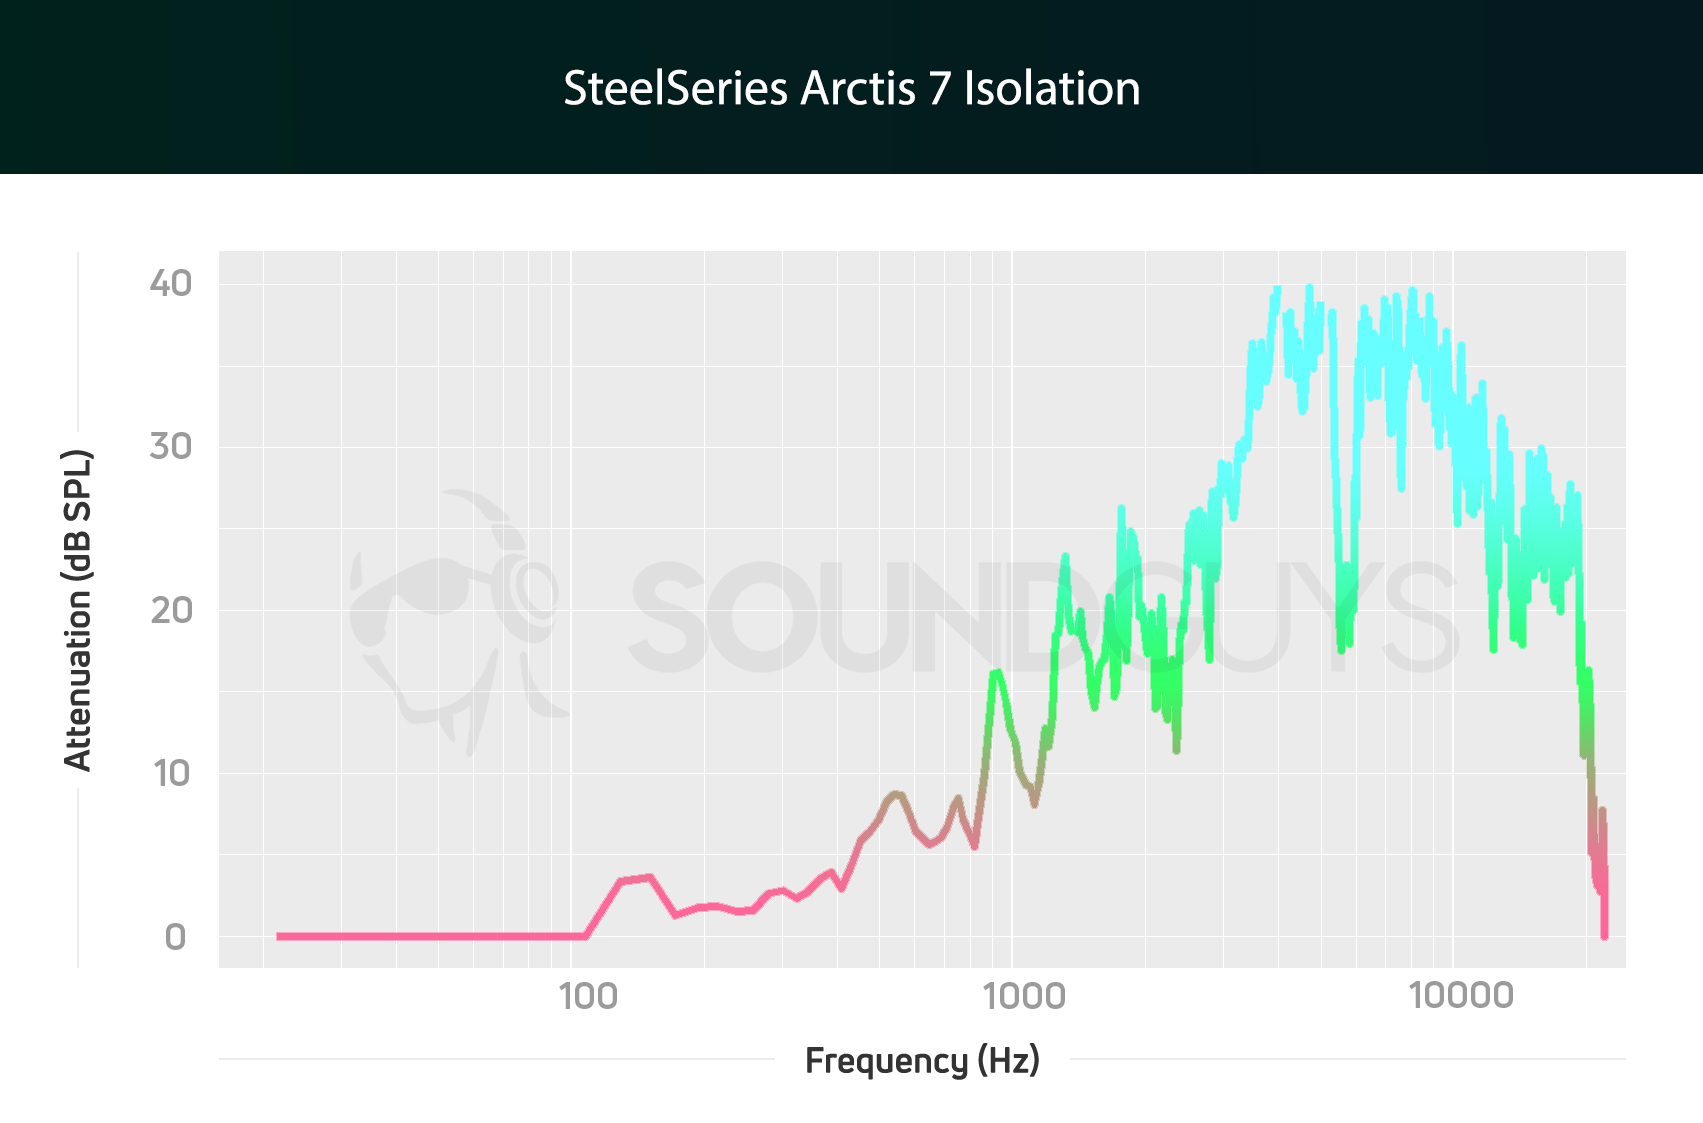 An isolation chart for the SteelSeries Arctis 7 Wireless gaming headset, which shows average attenuation for a gaming headset.